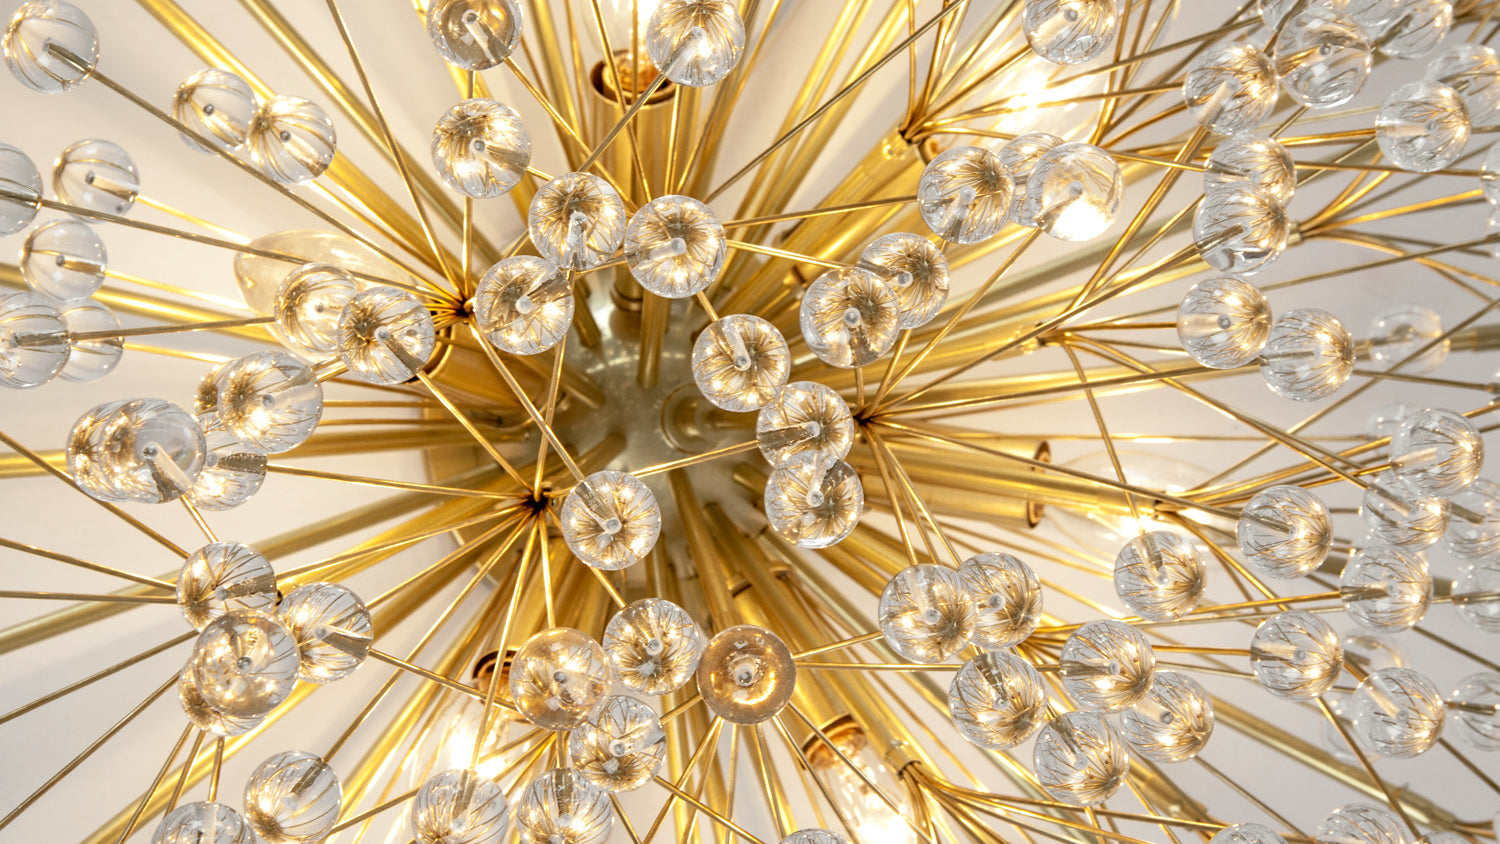 The Tony Duquette by Remains Lighting Dandelion Chandelier, its seed head seen up close and lit from within its polished brass fittings.